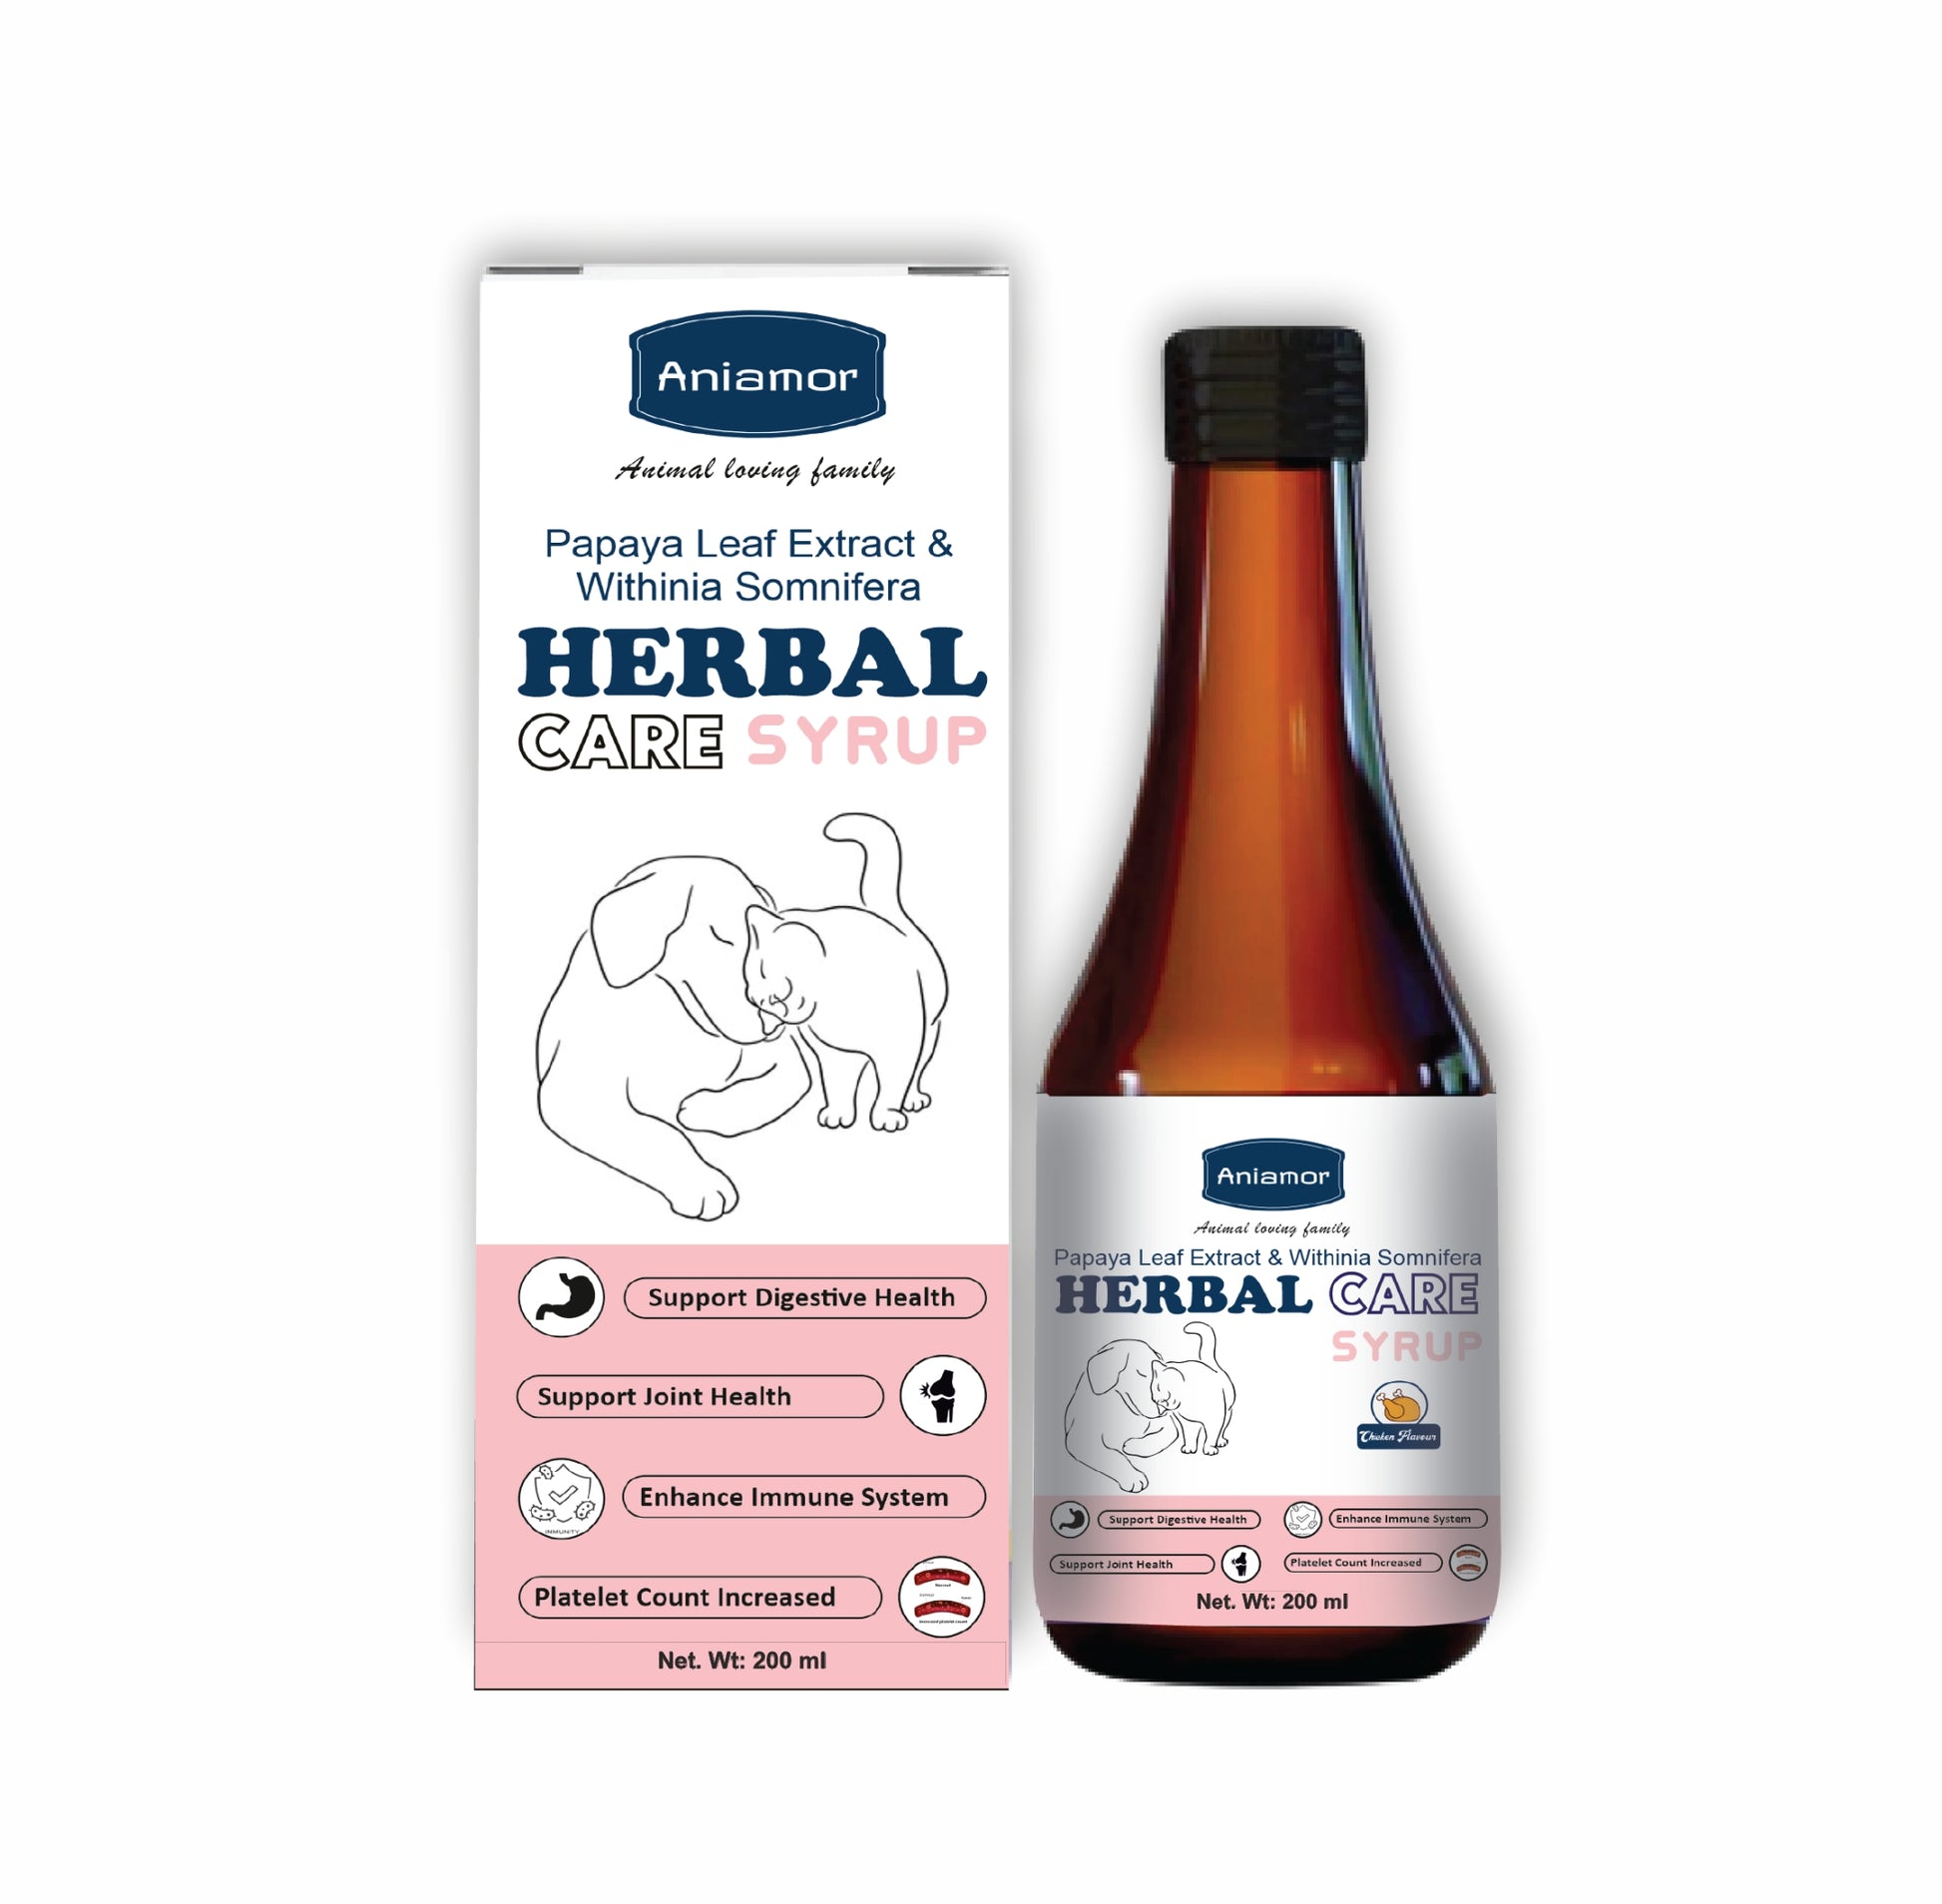 Herbal Care Syrup-Aniamor| Papaya leaf extract and withinia somnefera Syrup| 200ml